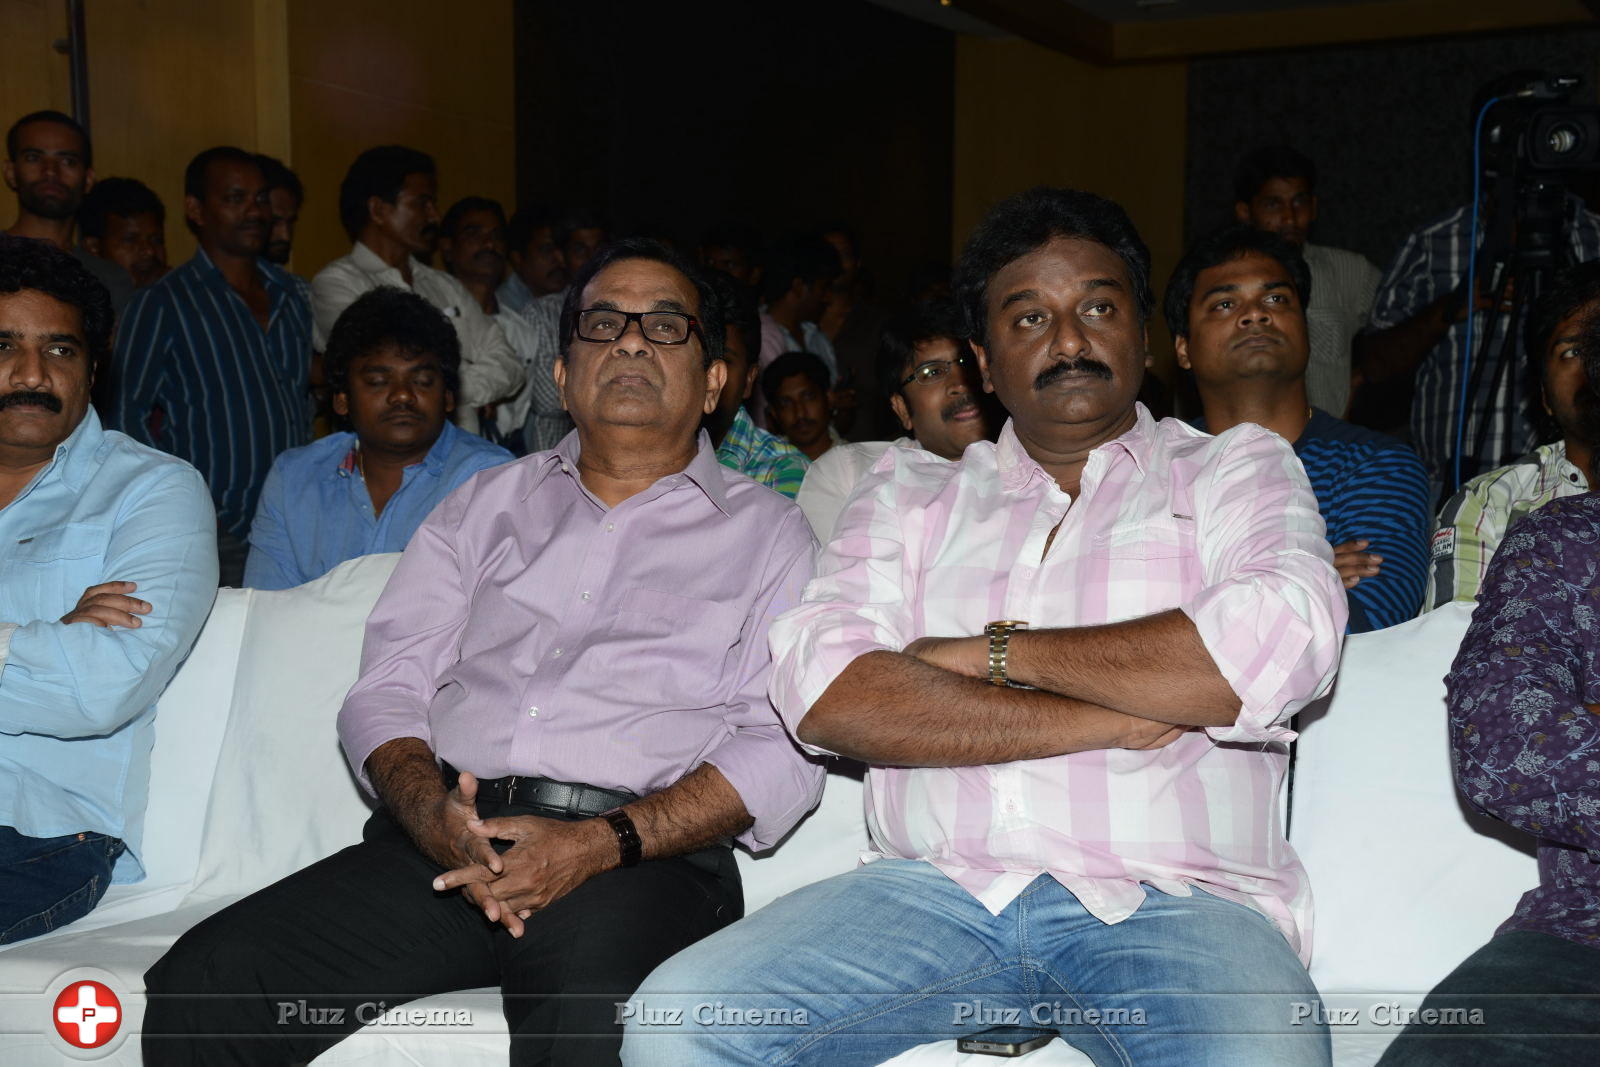 Geethanjali Movie First Look Launch Pictures | Picture 746443